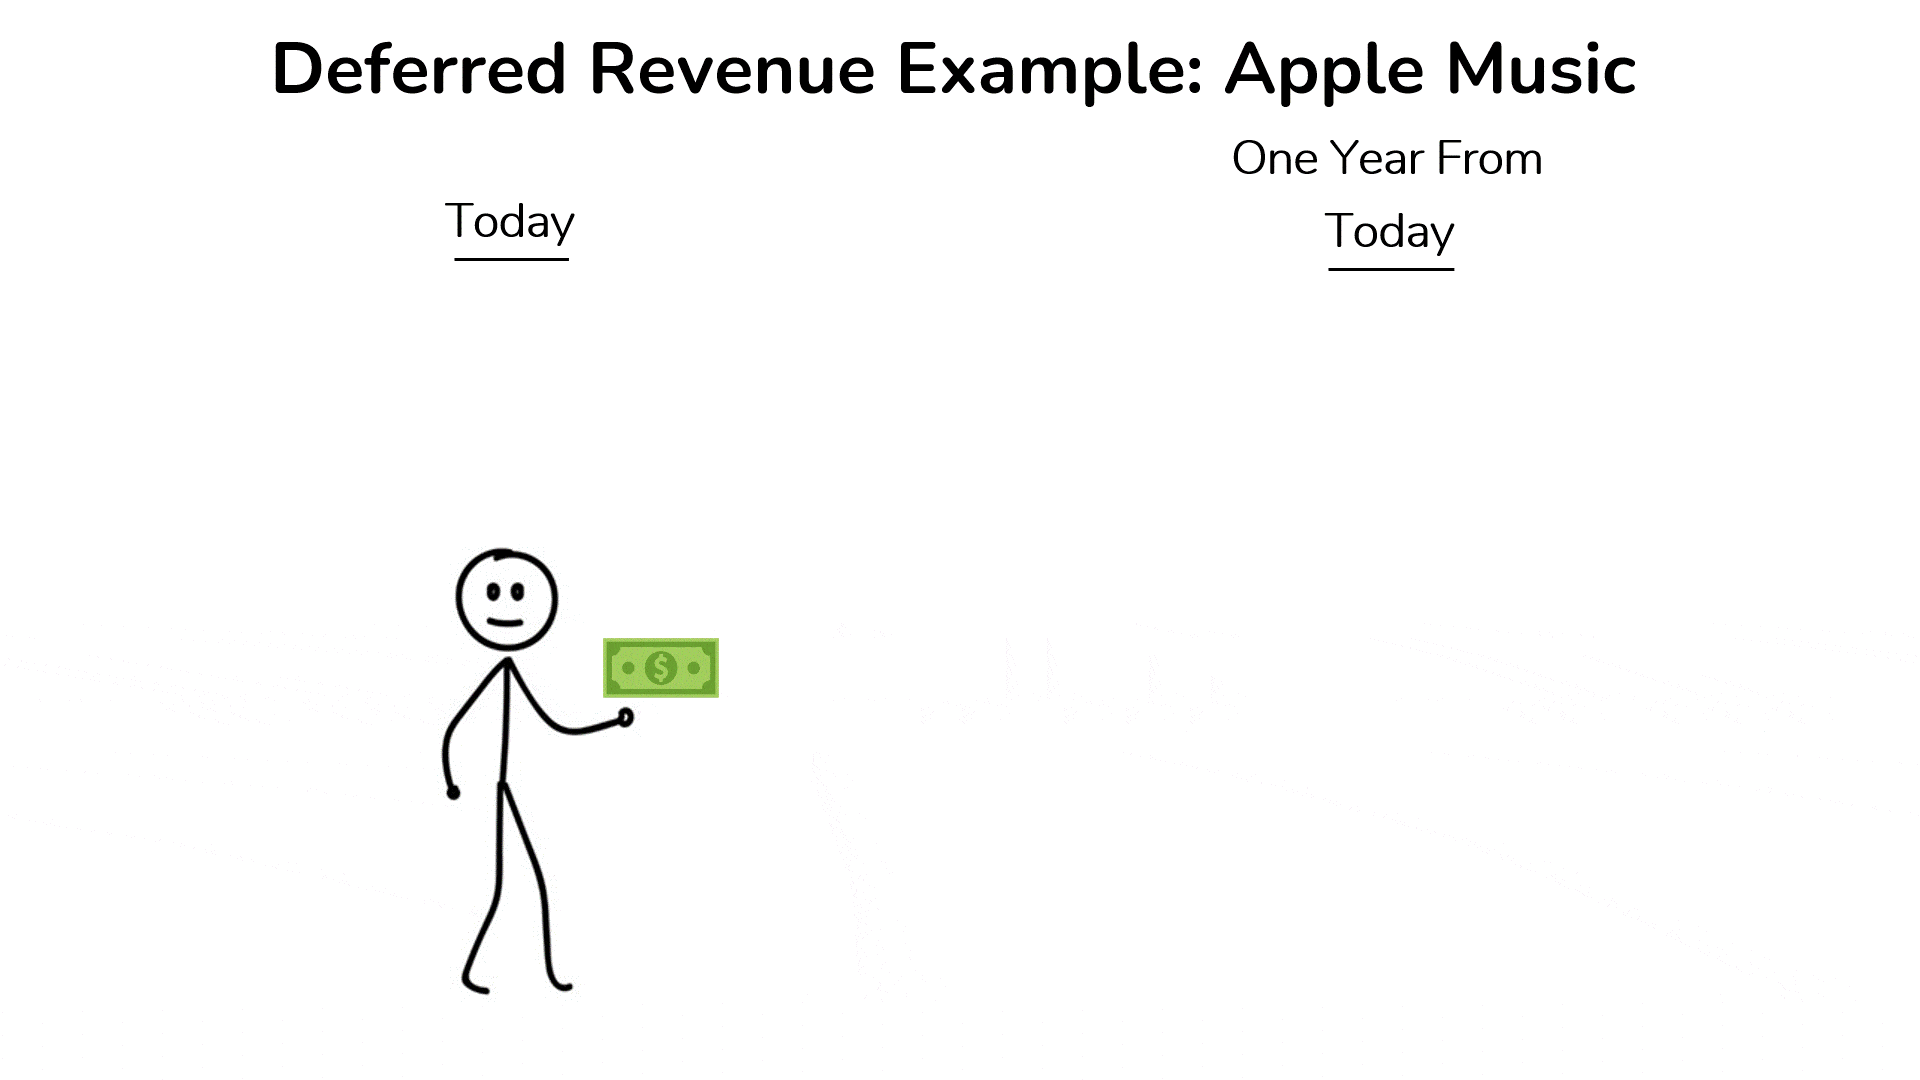 A stick figure pays for an Apple Music subscription and moves into the future with headphones